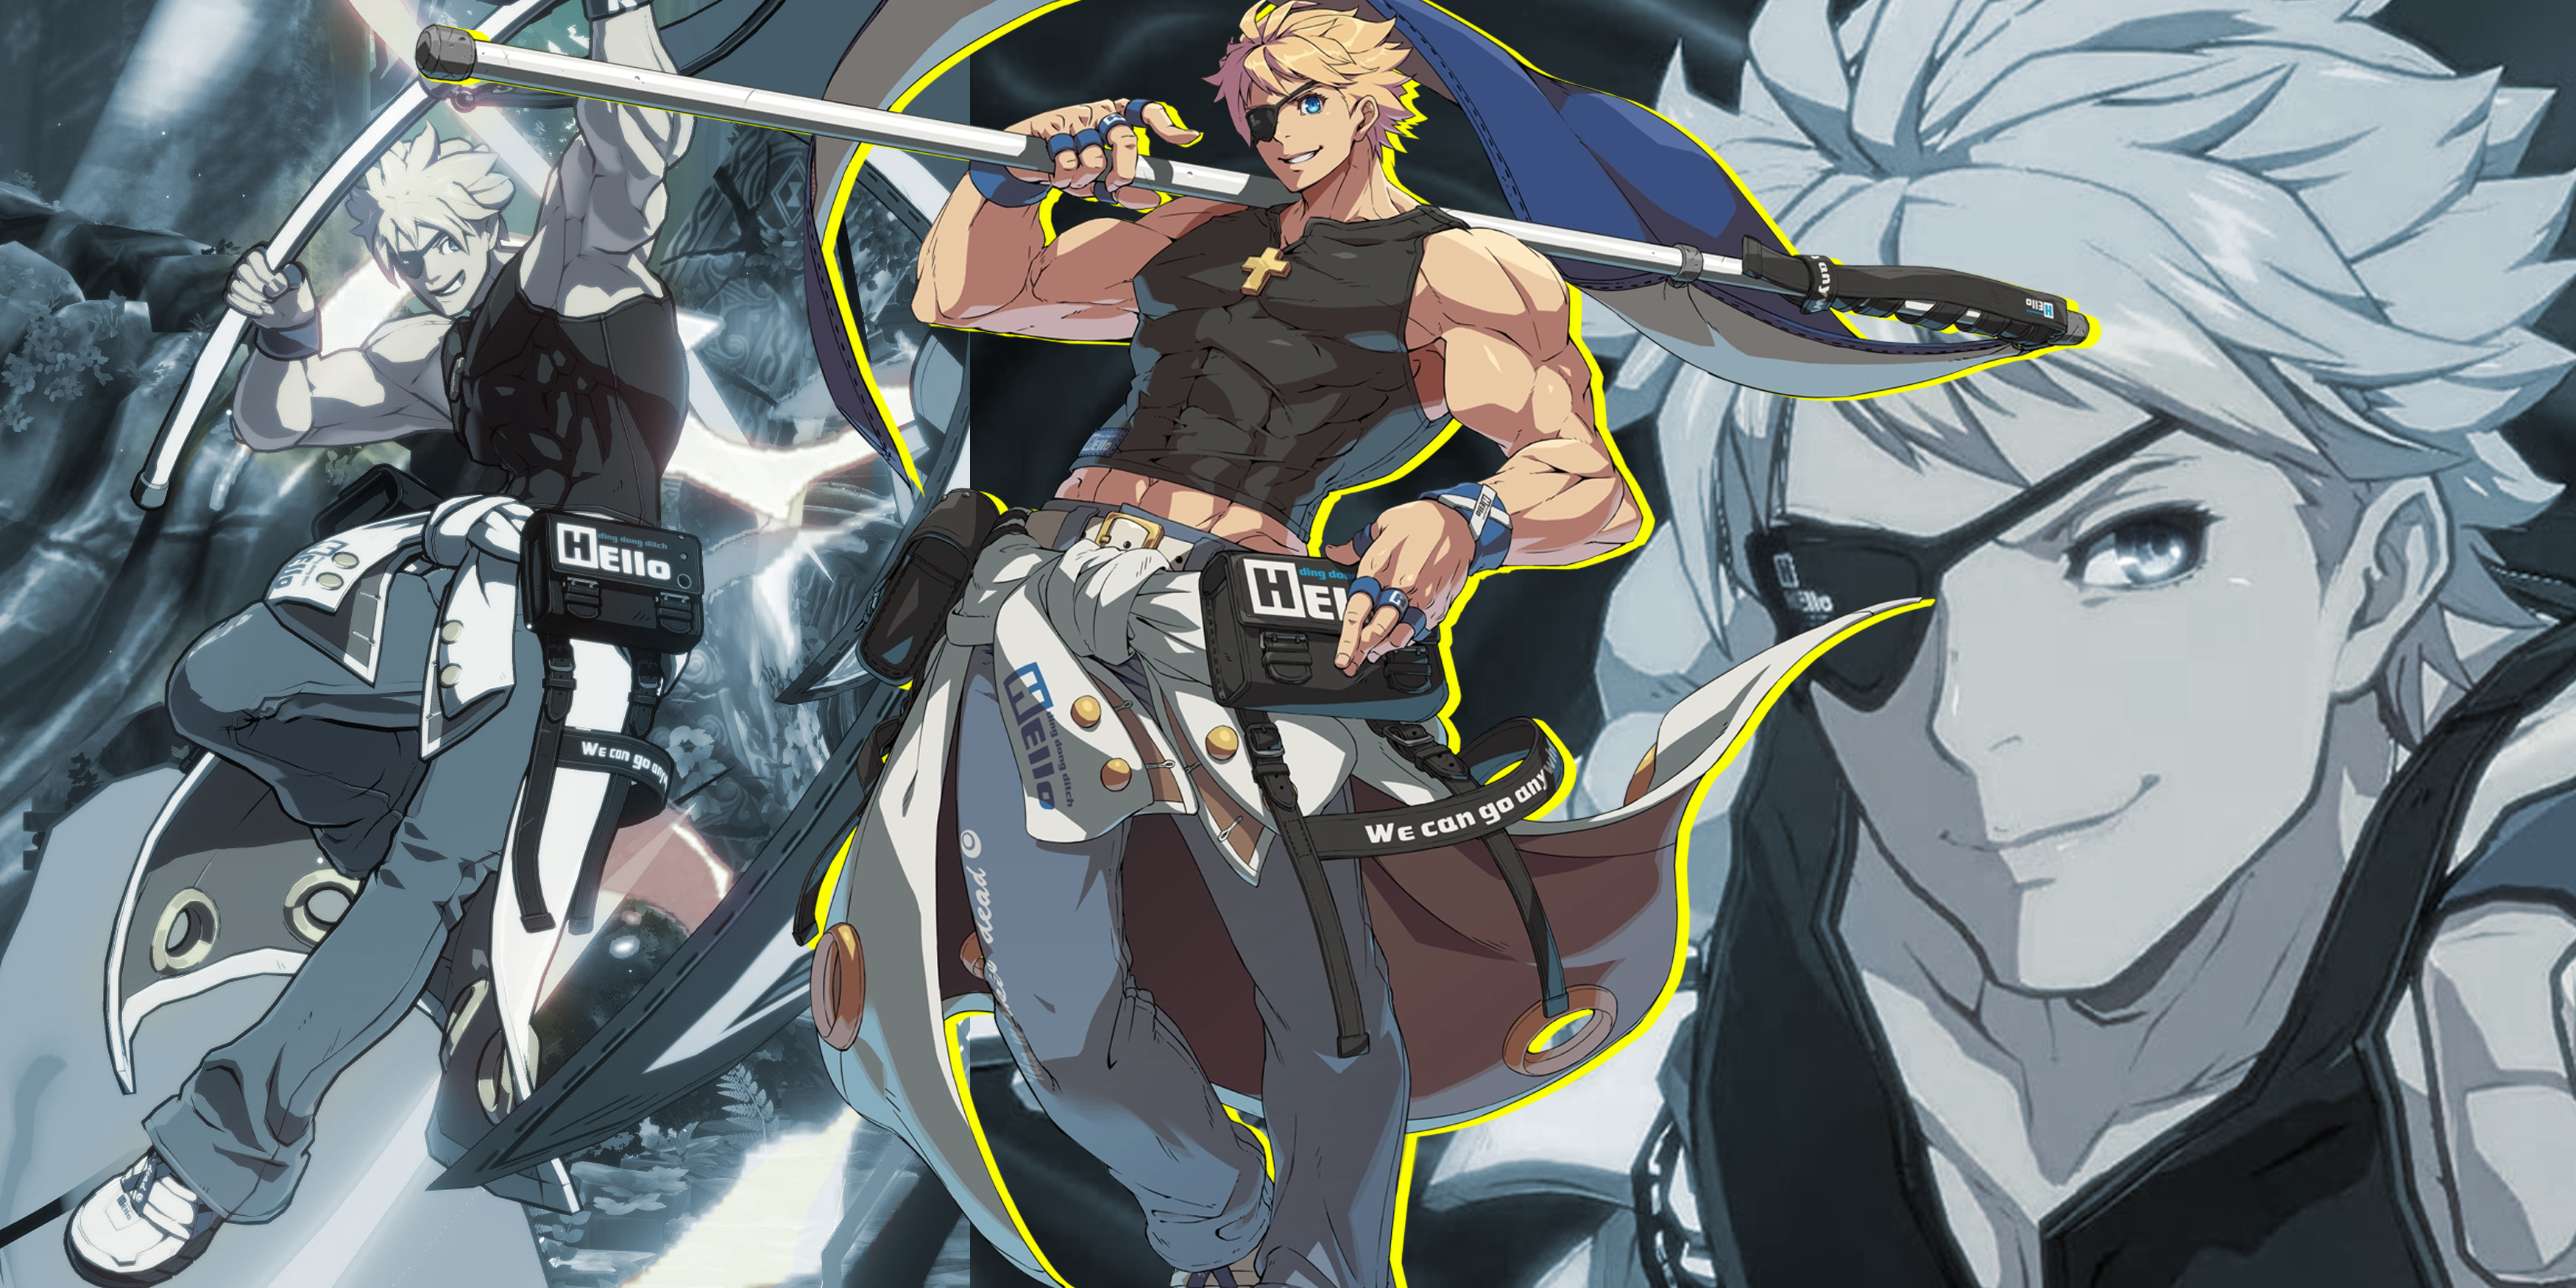 A collage of Sin Kiske from Guilty Gear Strive